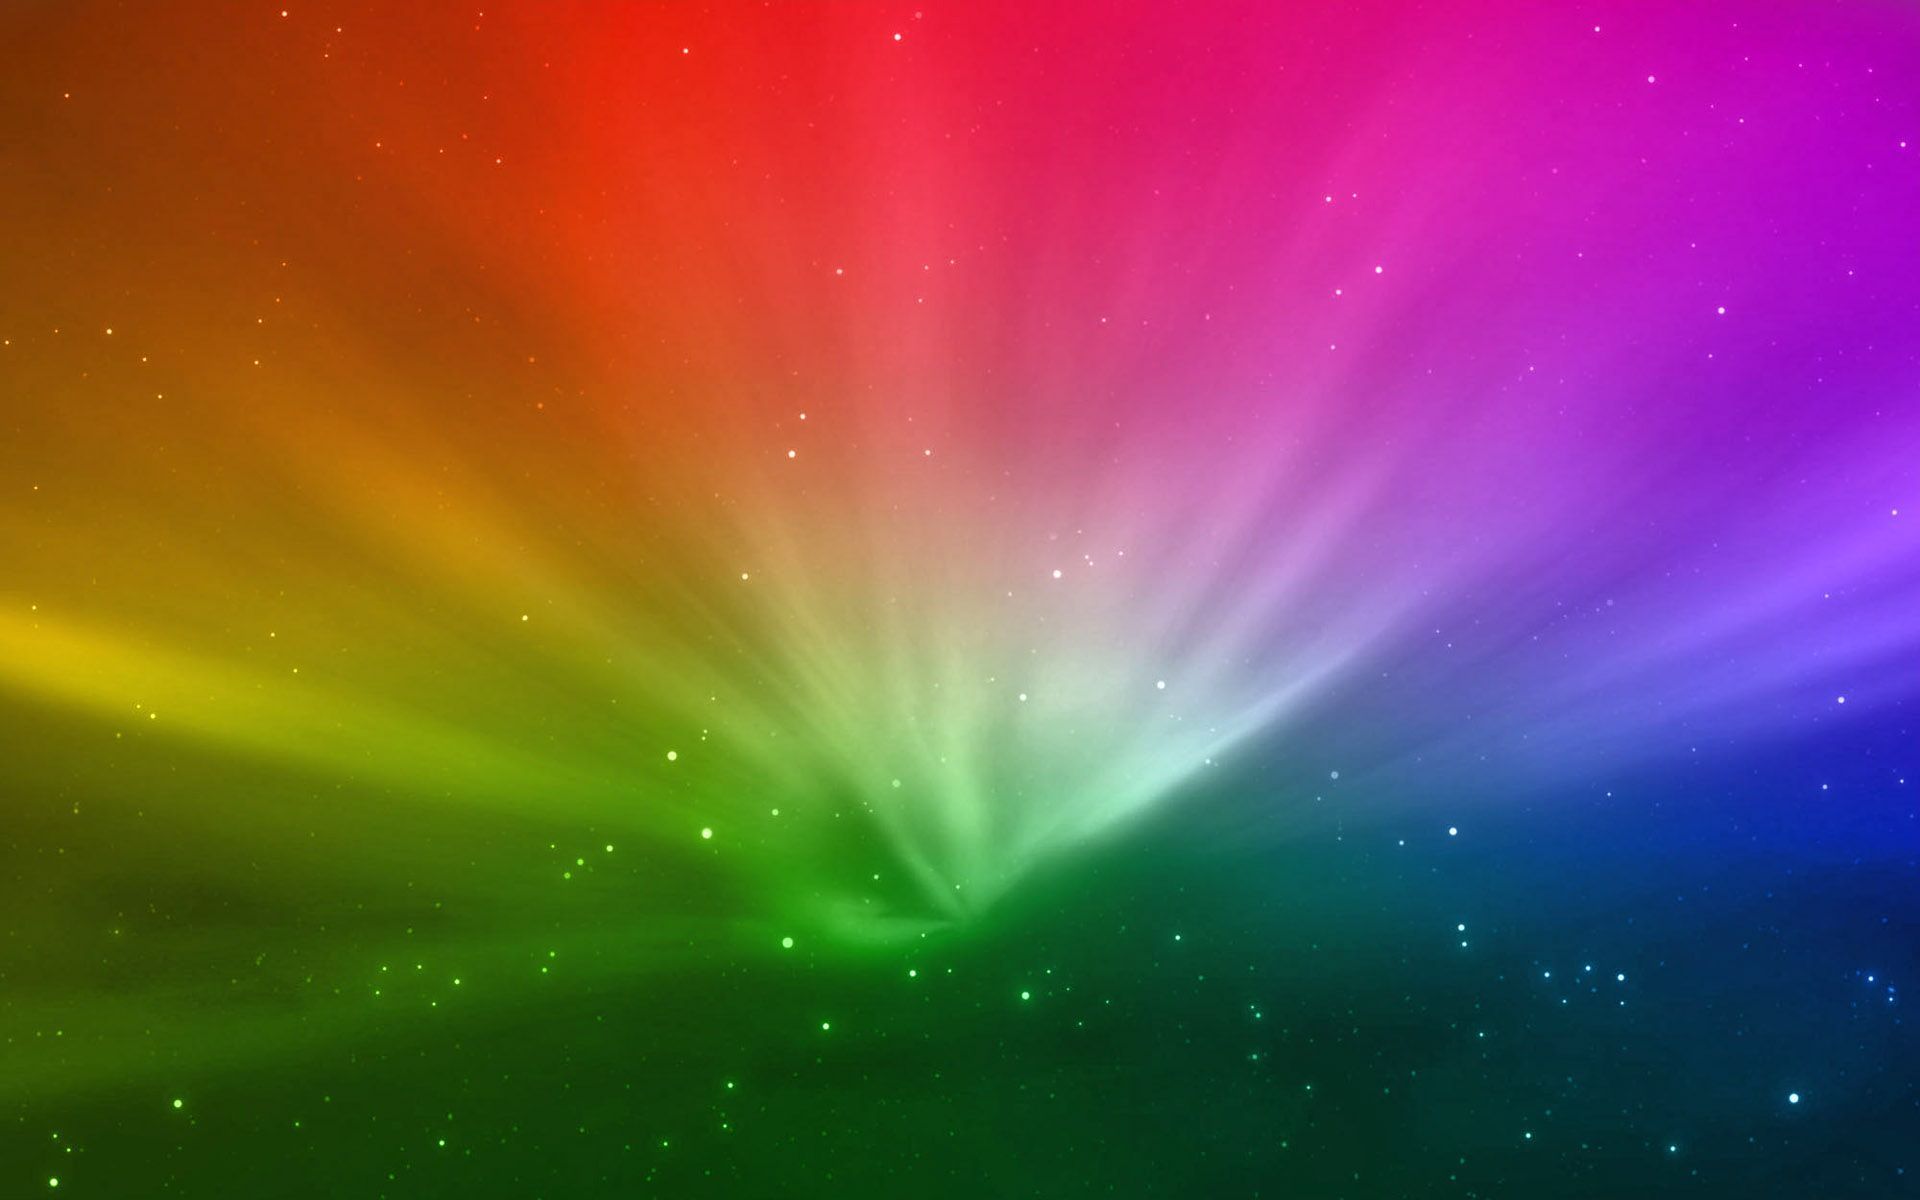 Rainbow Light wallpaper. Rainbow wallpaper, Rainbow abstract painting, Rainbow abstract